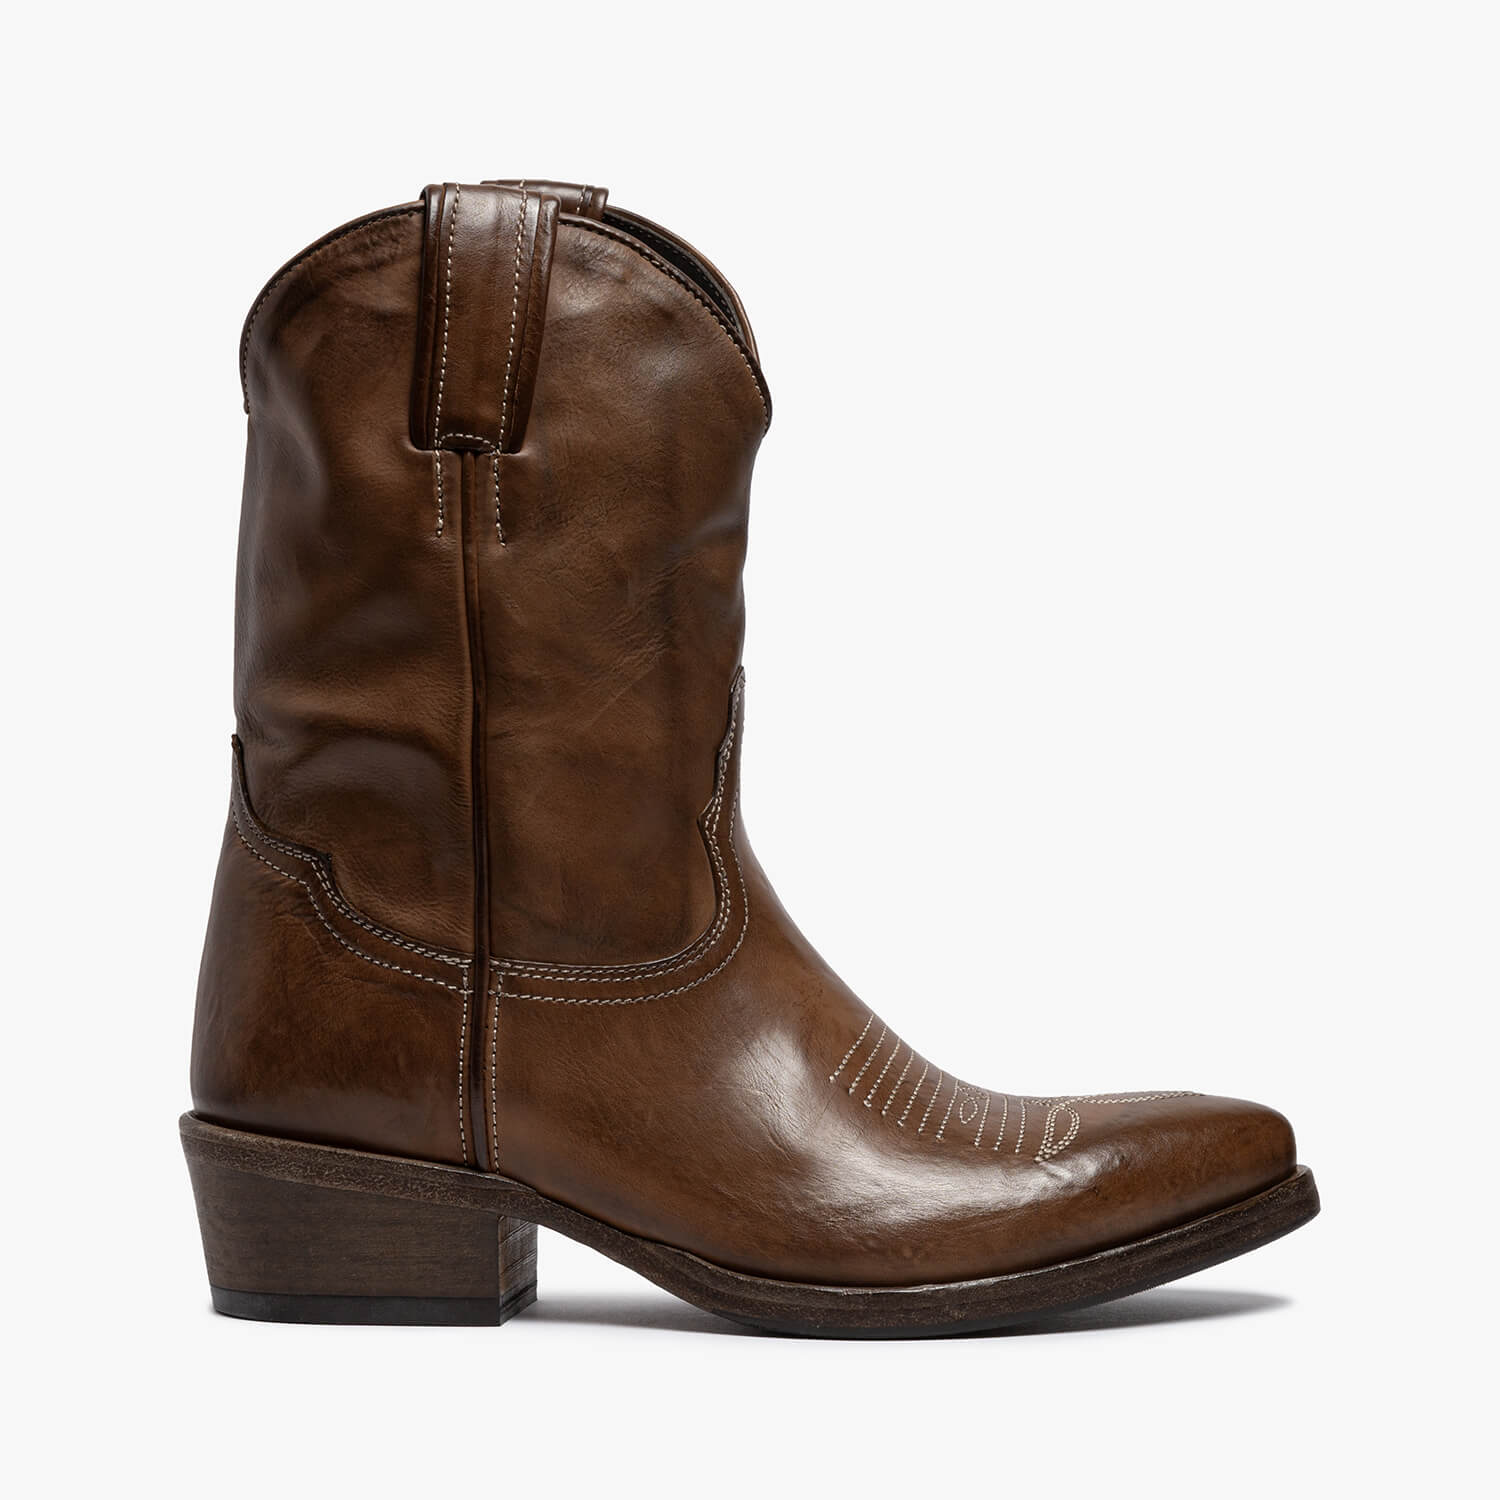 Alessandra | Calf leather brown mid Texan boot